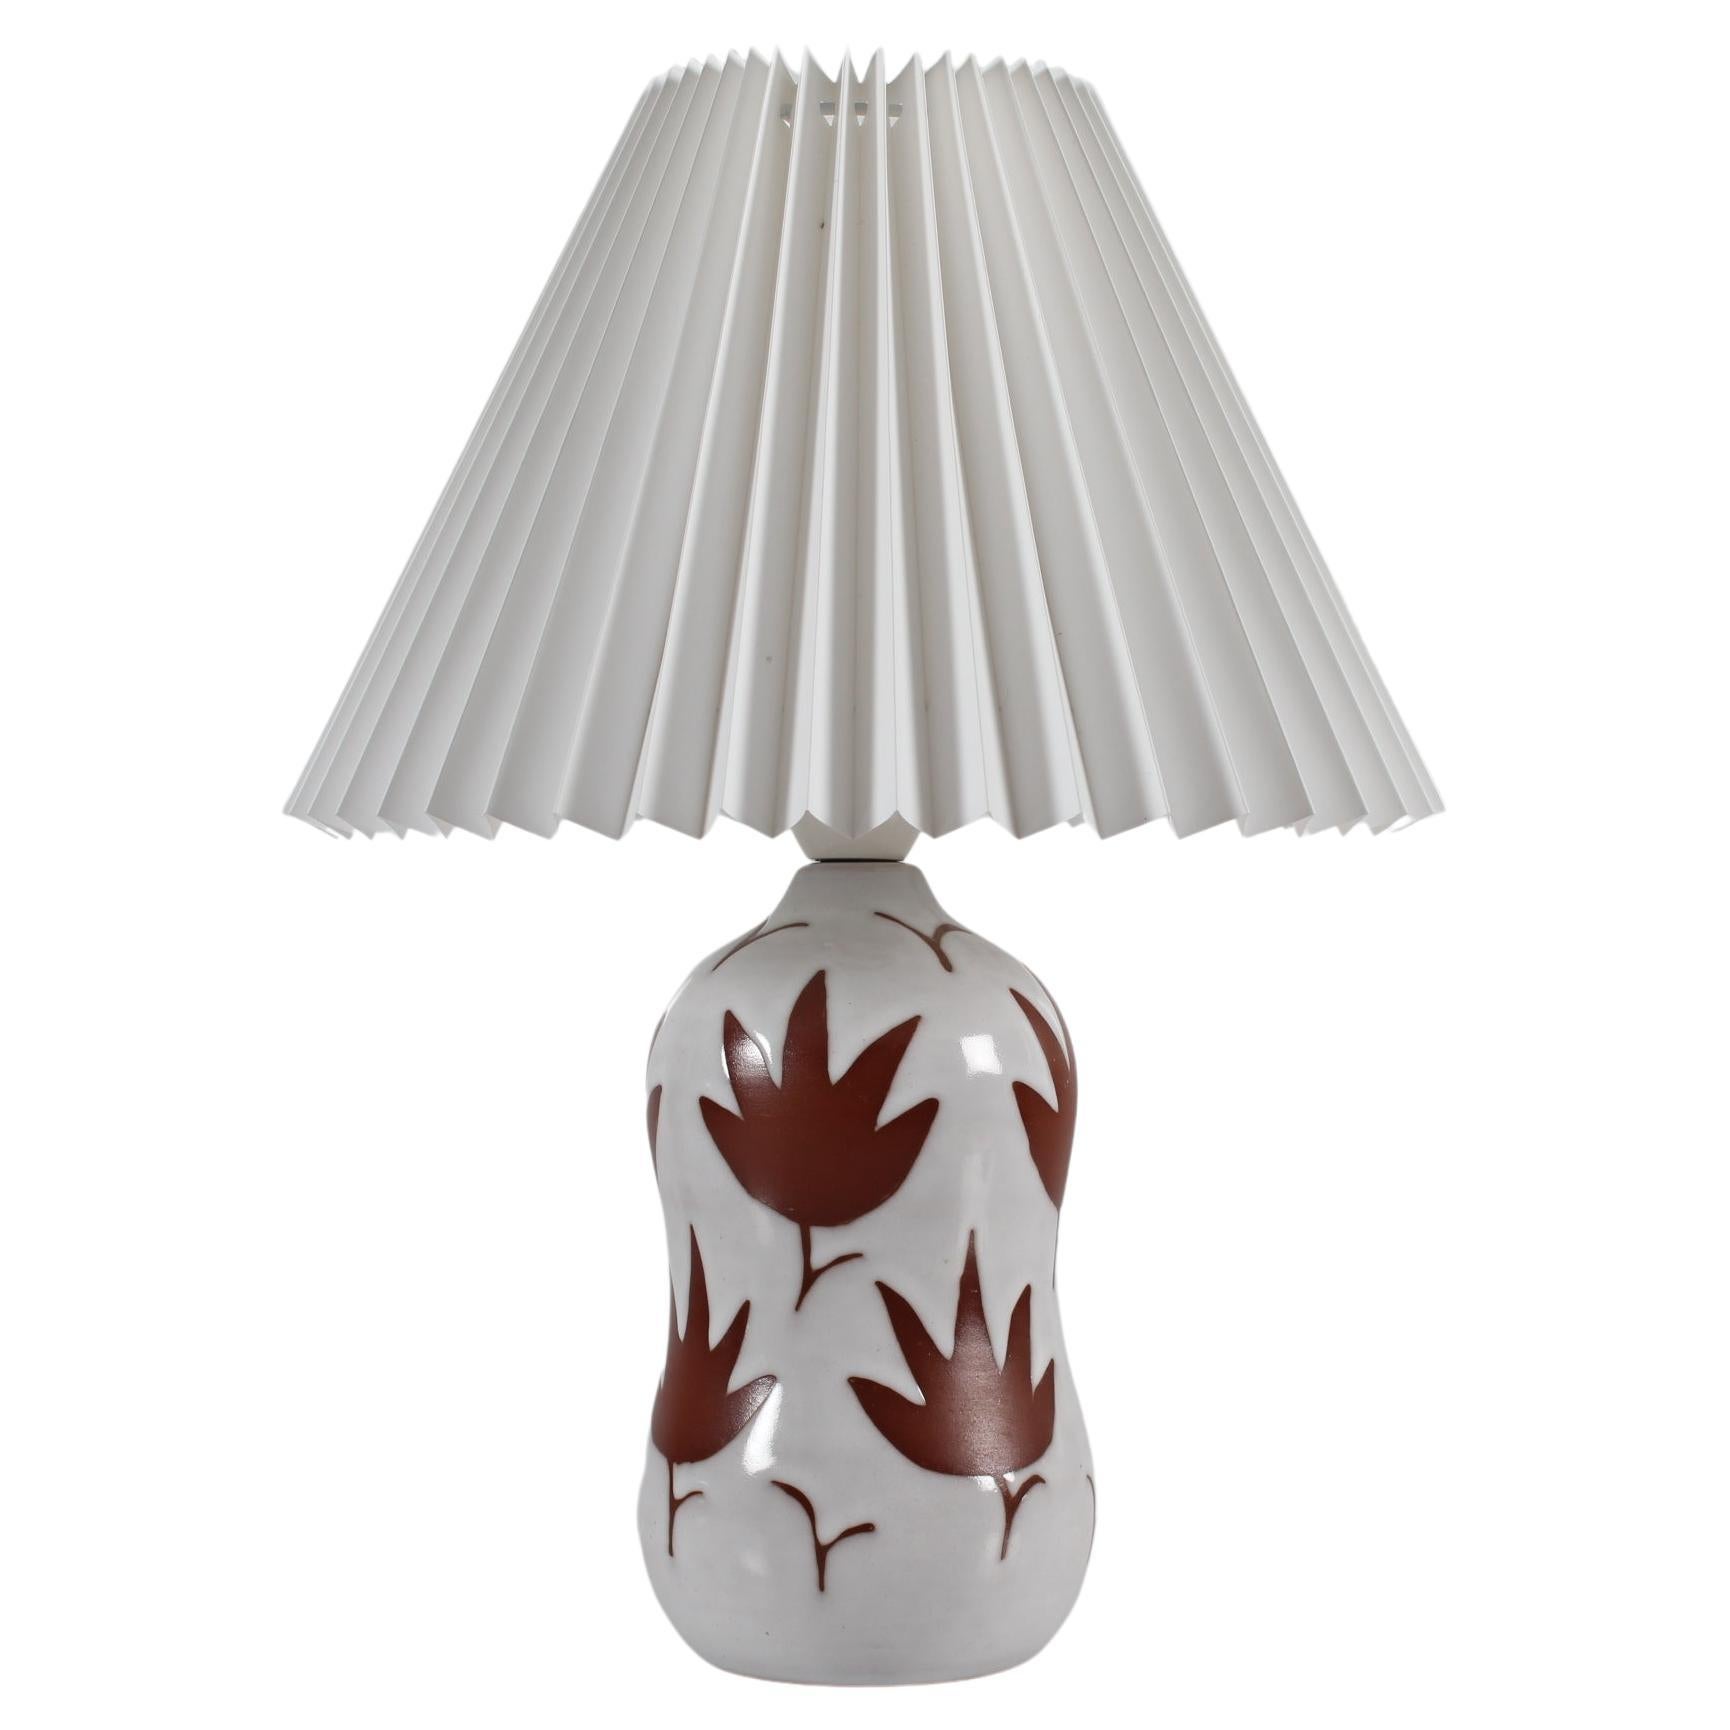 Danish Ceramic Table Lamp with White Glaze and Brown Leaf Pattern 1950s